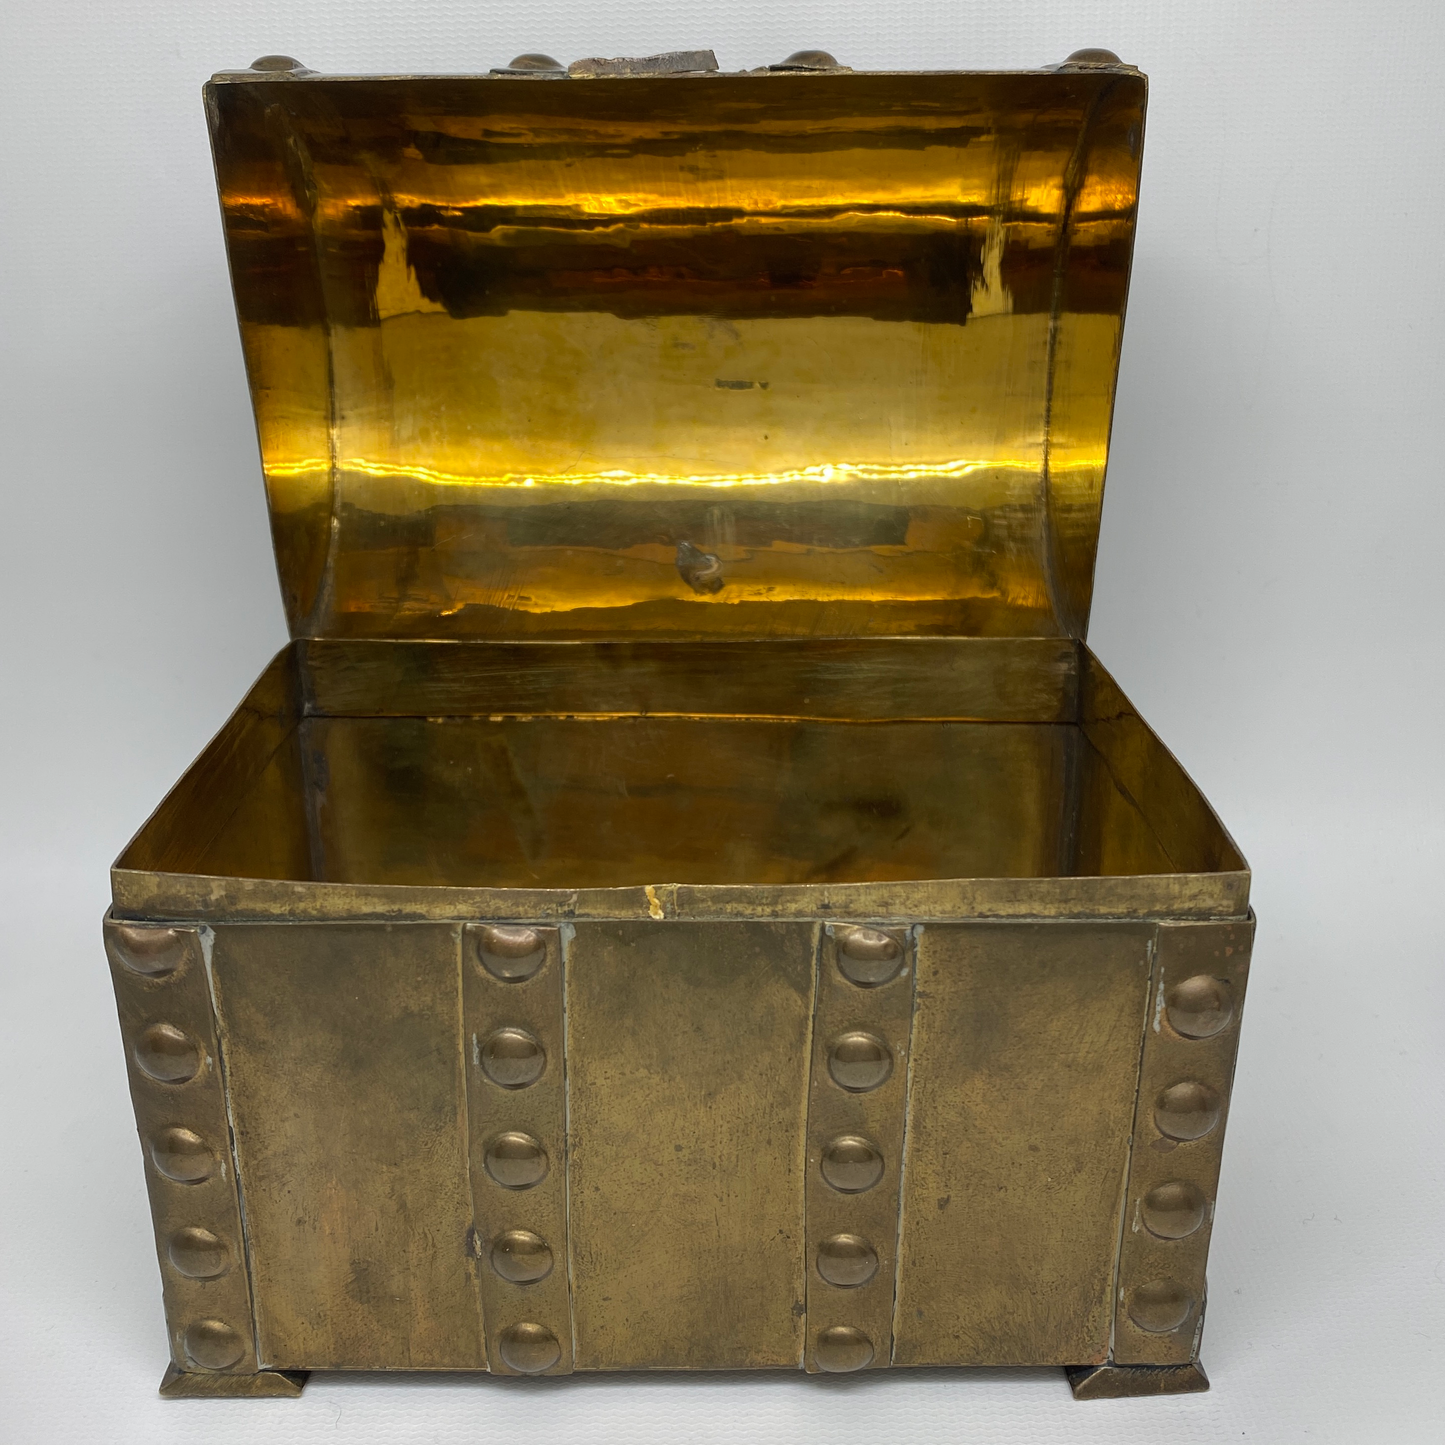 Mottahedeh Brass Trunk Hinged Box